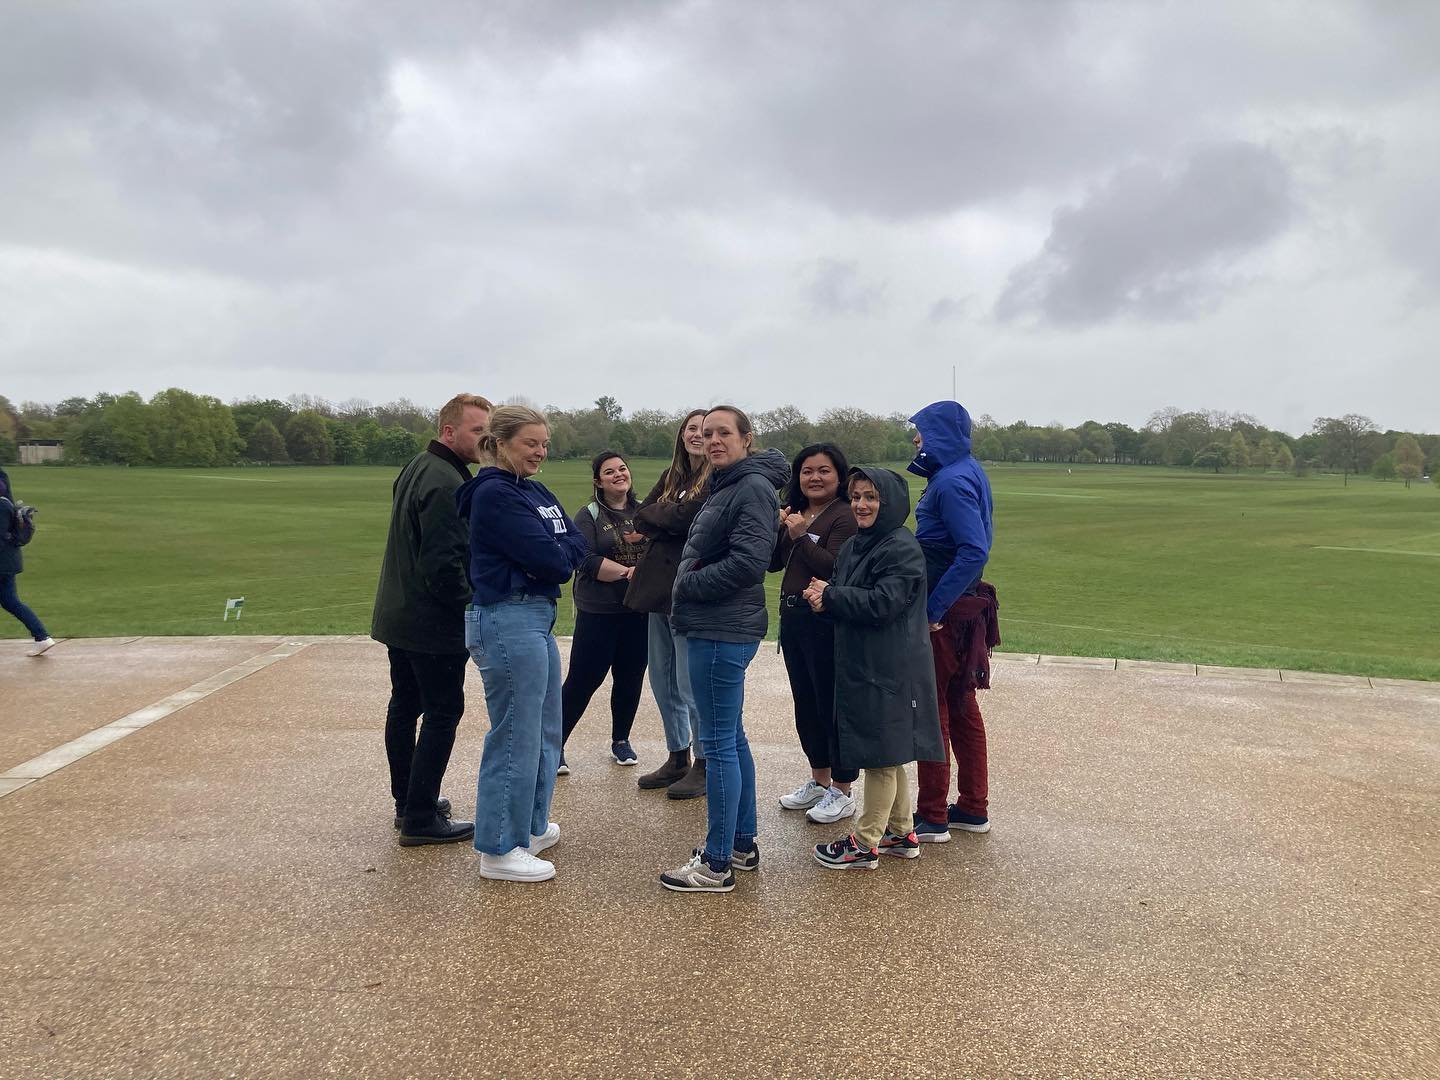 &ldquo;I just want to get back outside!&rdquo; someone said after the first walk and talk of the morning when we&rsquo;d come back inside to debrief the experience. 

It felt risky designing a company away day for 50 staff based around walking in Apr